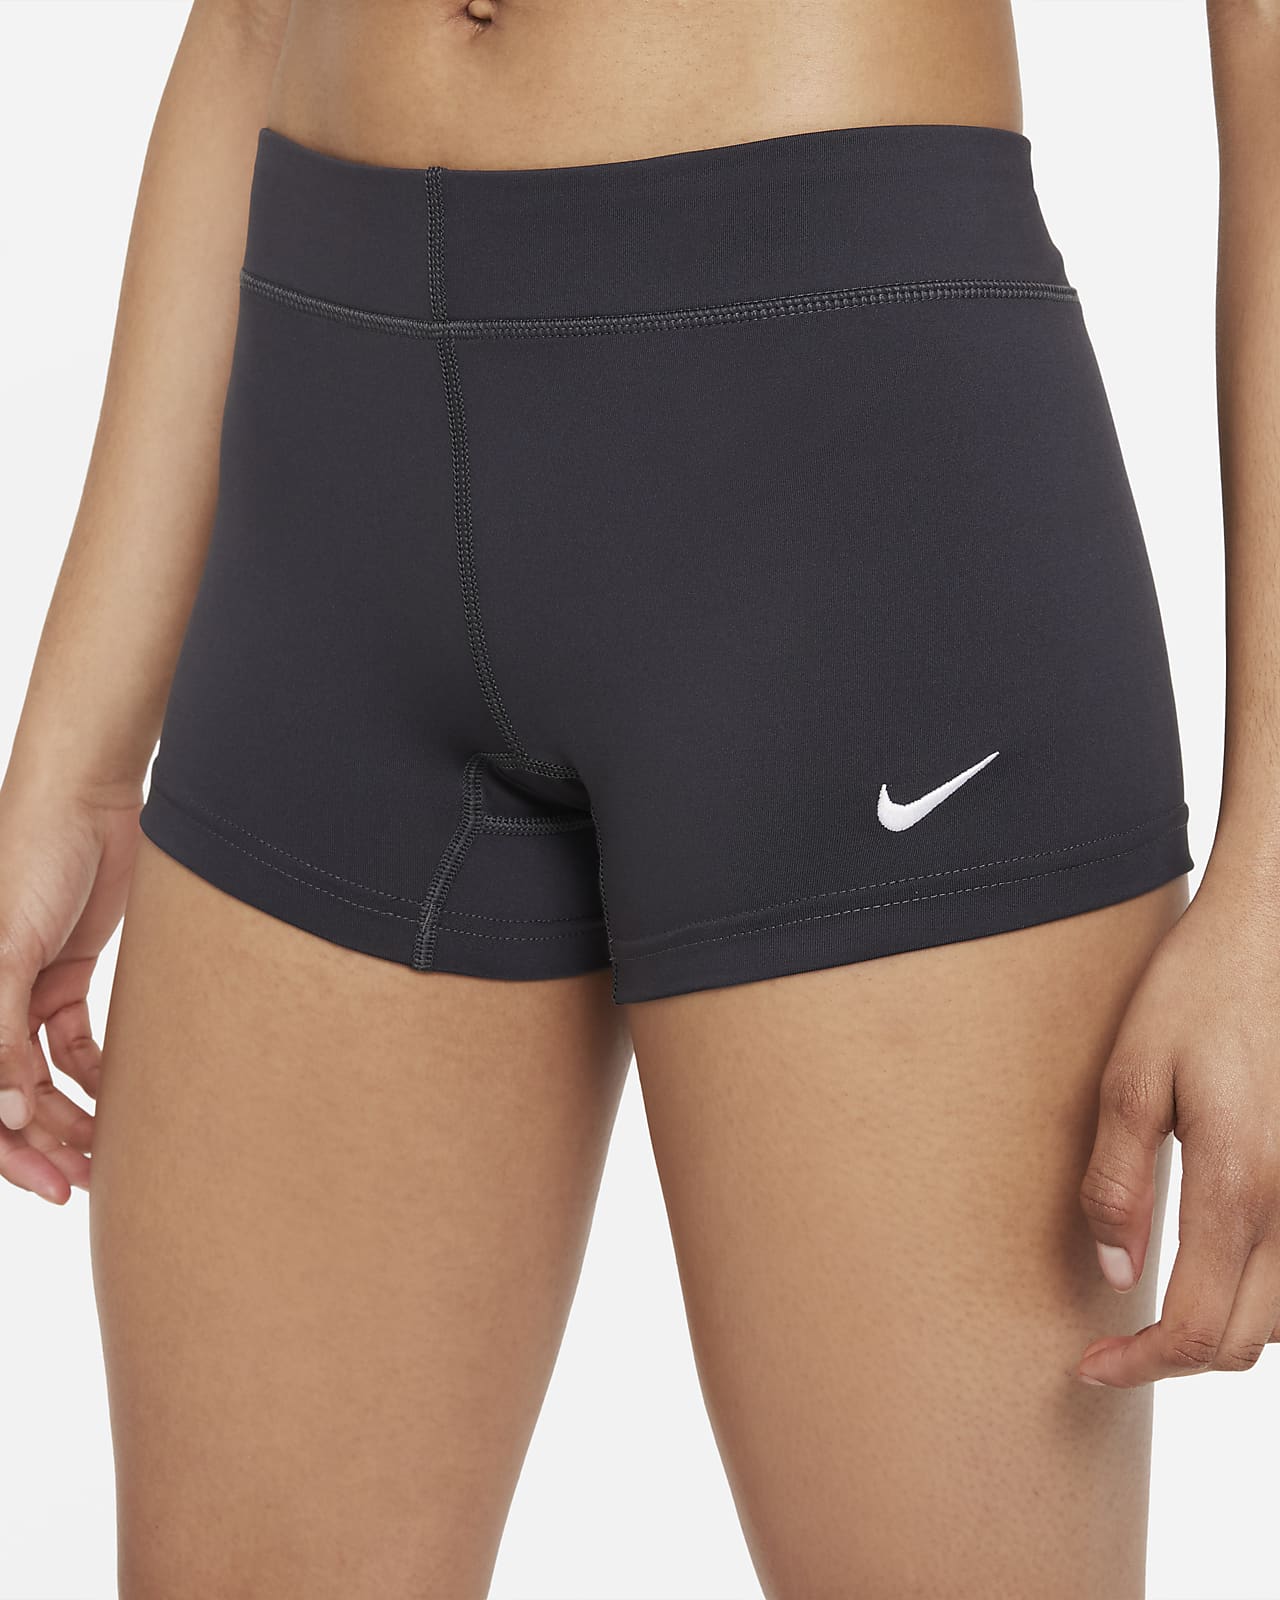 Nike Performance Women's Game Volleyball Shorts.